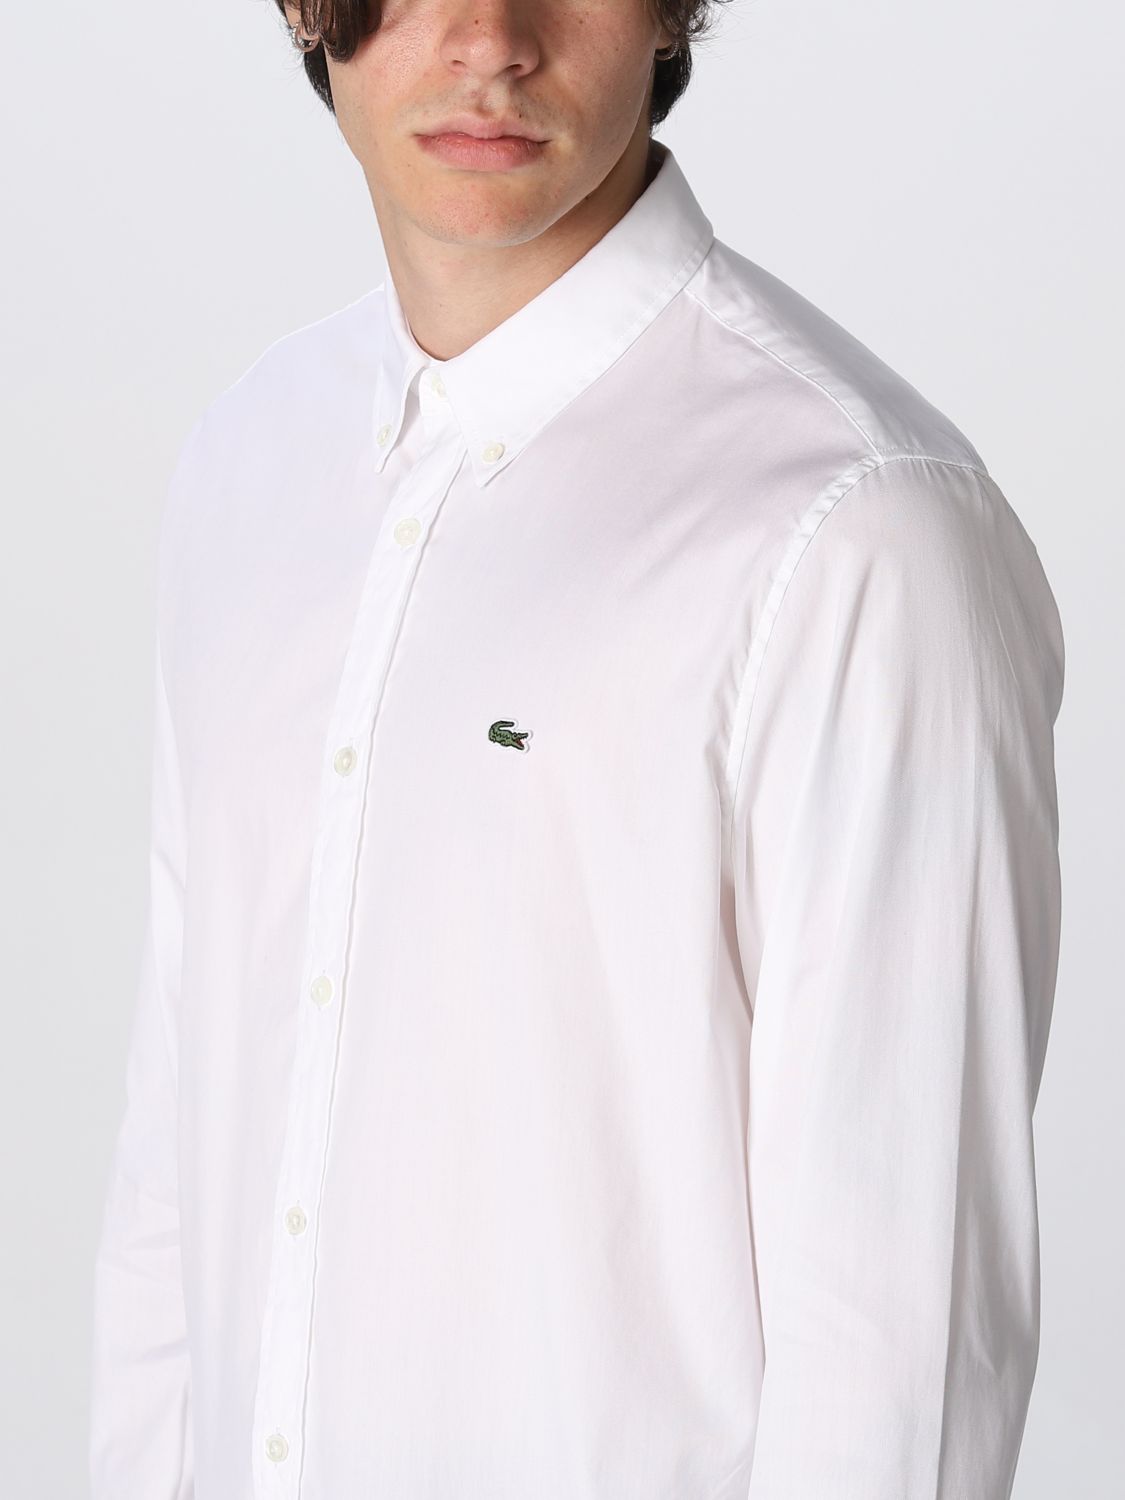 Afleiding token Buiten adem LACOSTE: shirt for man - White | Lacoste shirt CH2933 online on GIGLIO.COM